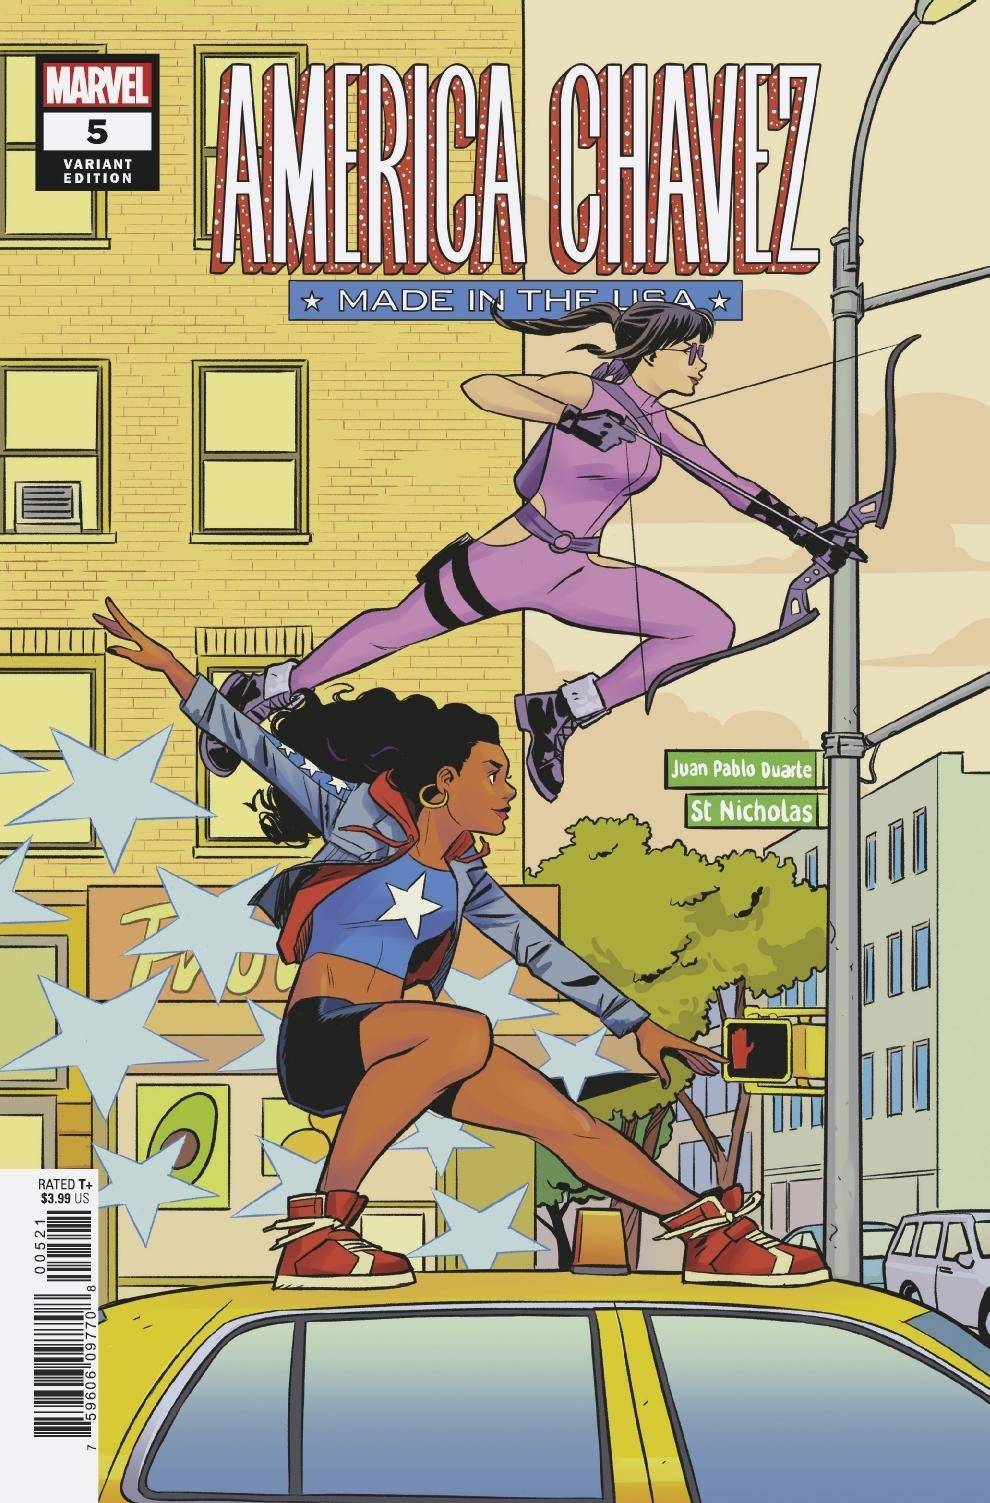 America Chavez Made In Usa #5 (Of 5) Bustos Var (08/11/2021) - The One Stop Shop Comics & Games